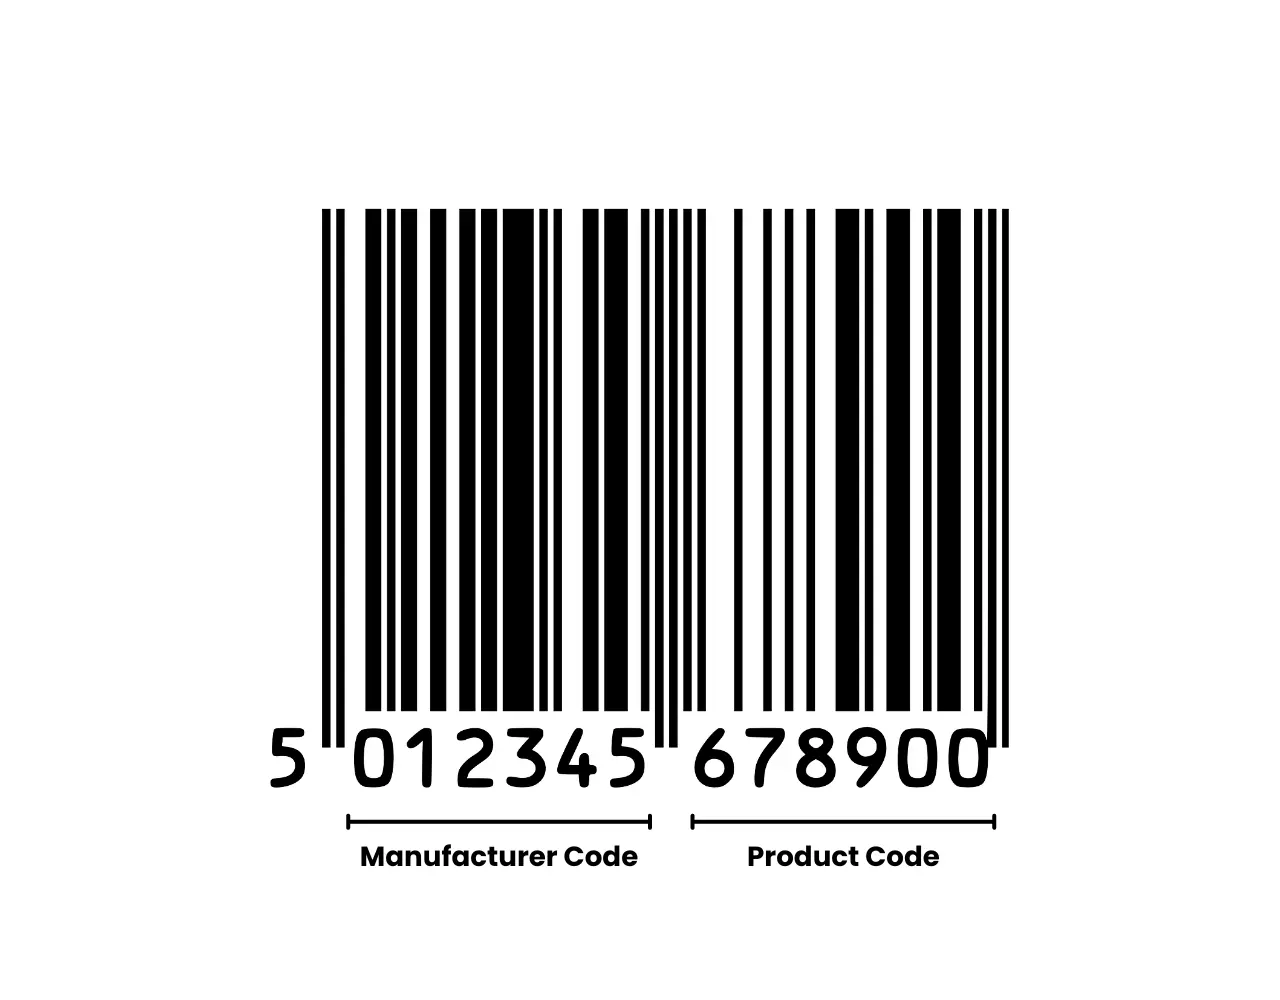 Barcodes Components 2